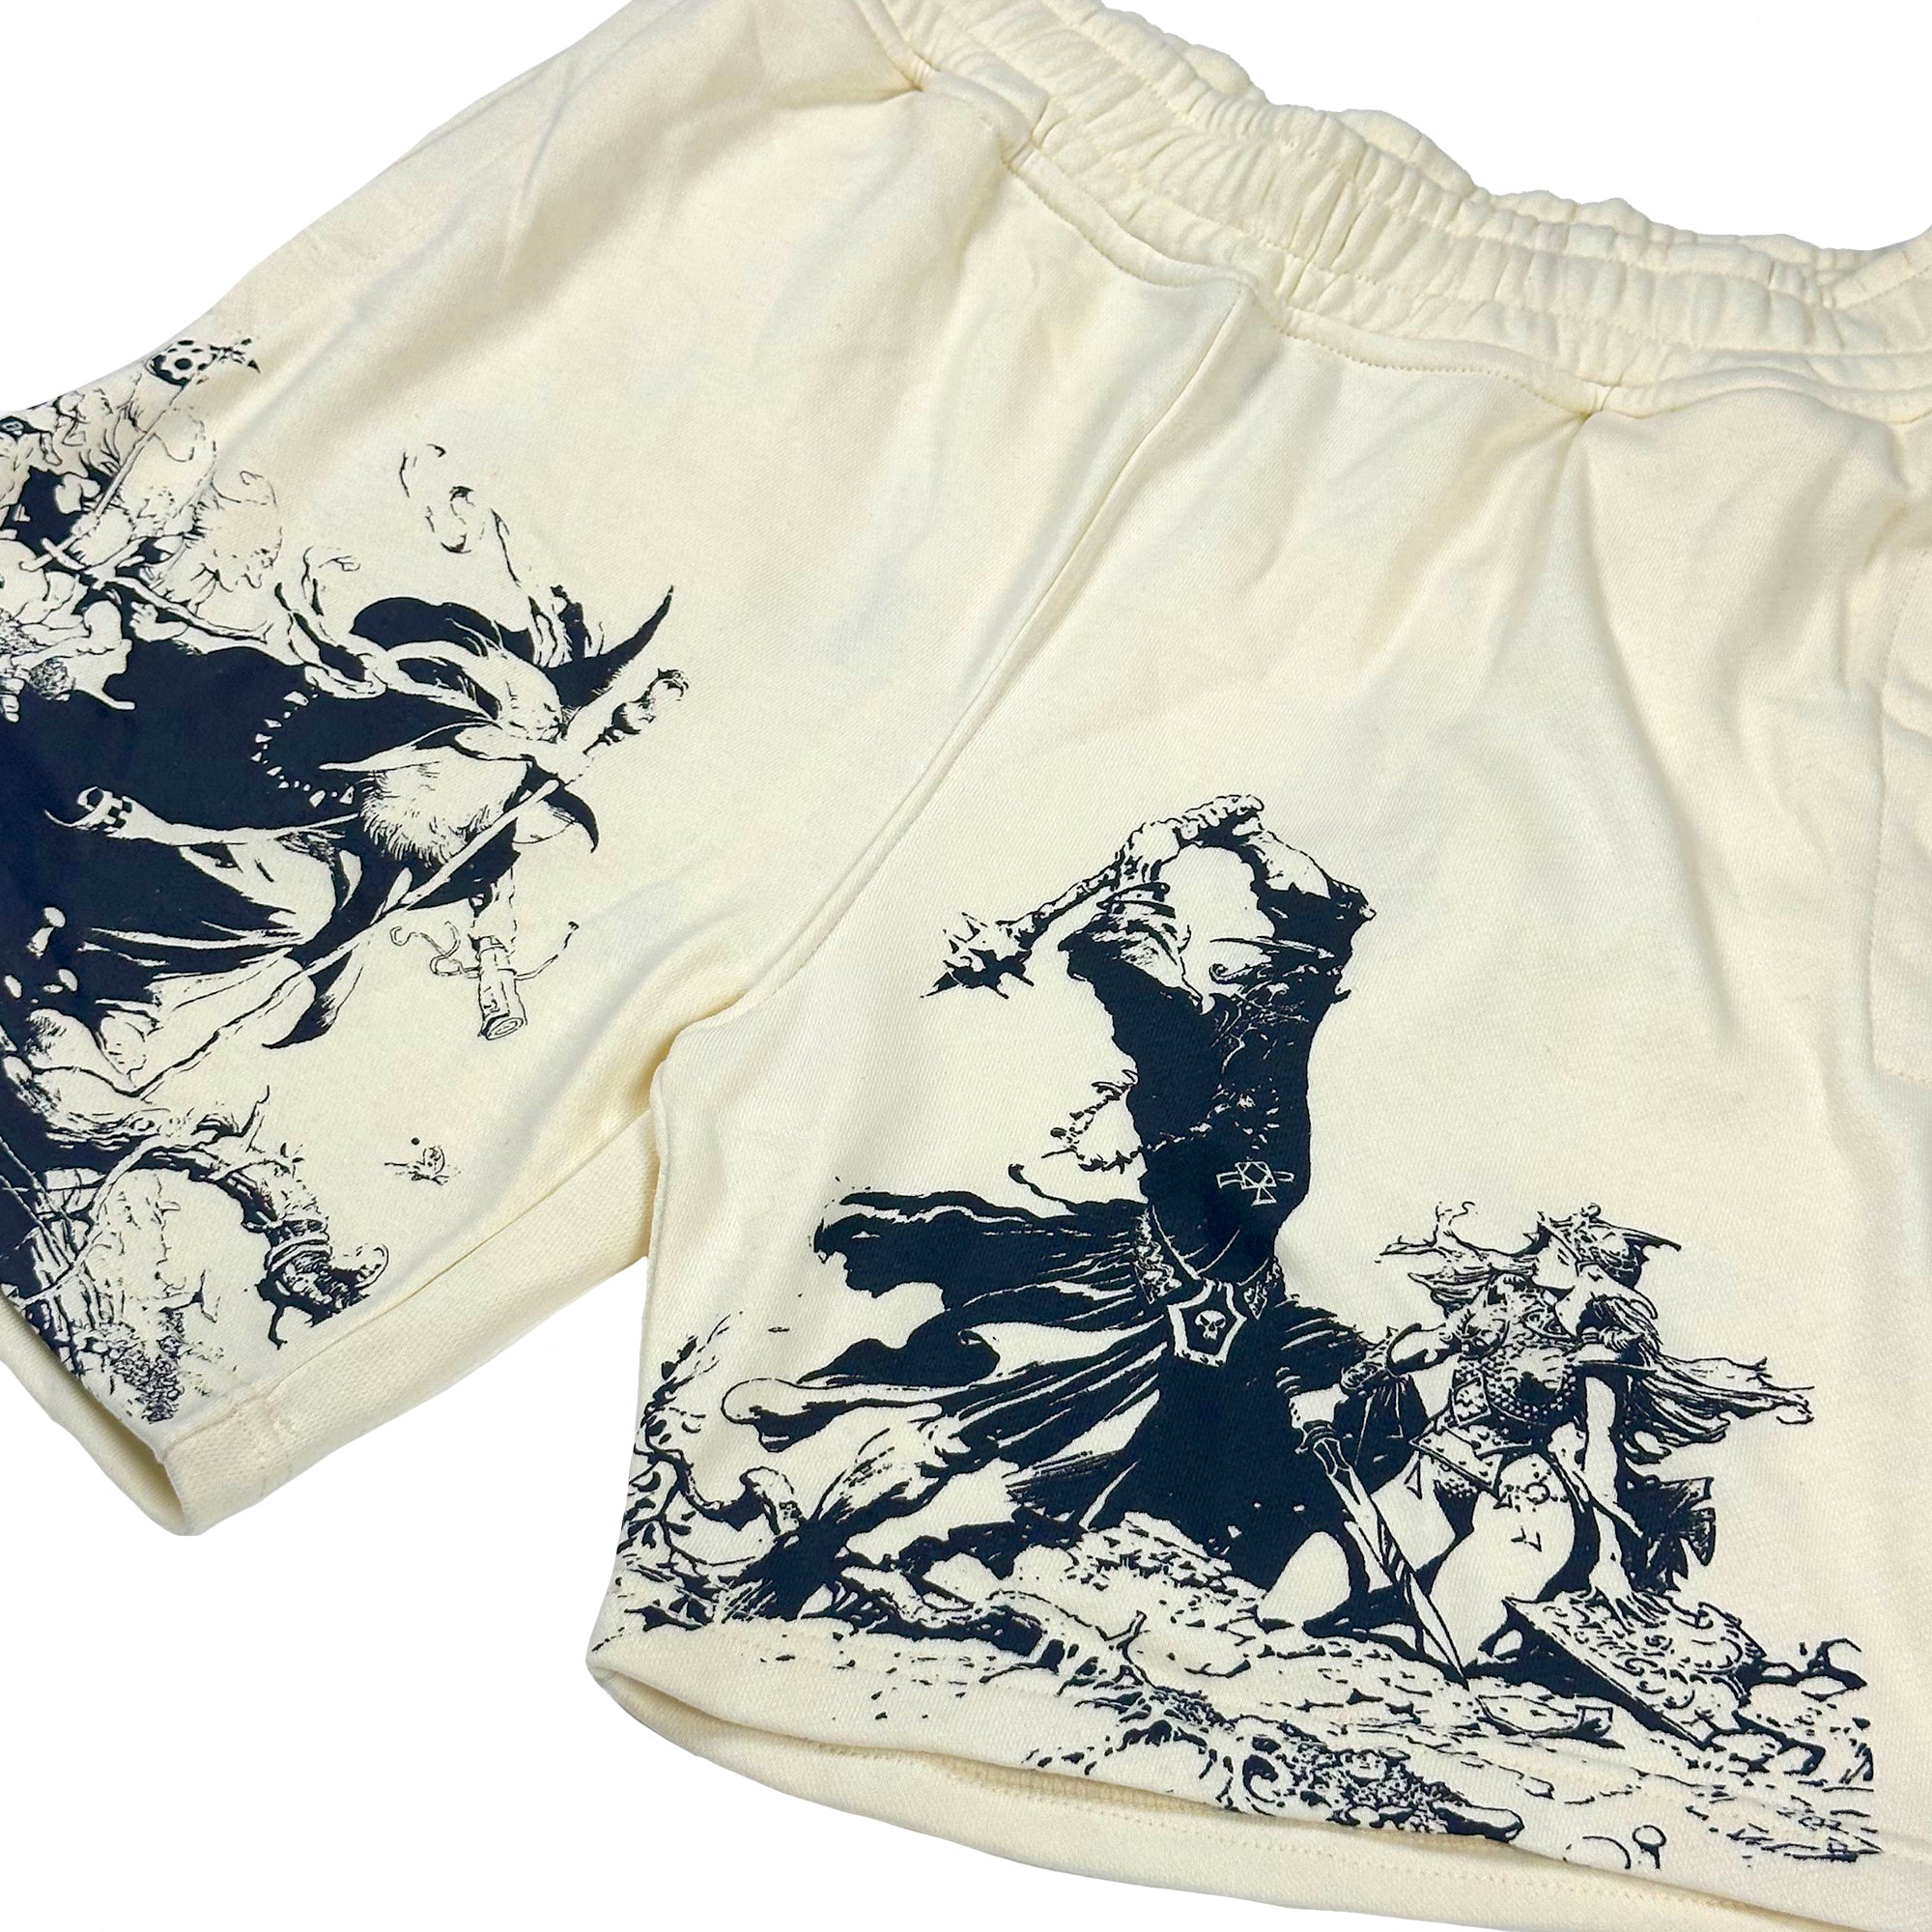 Frazetta's Lord of the Rings Cotton Shorts